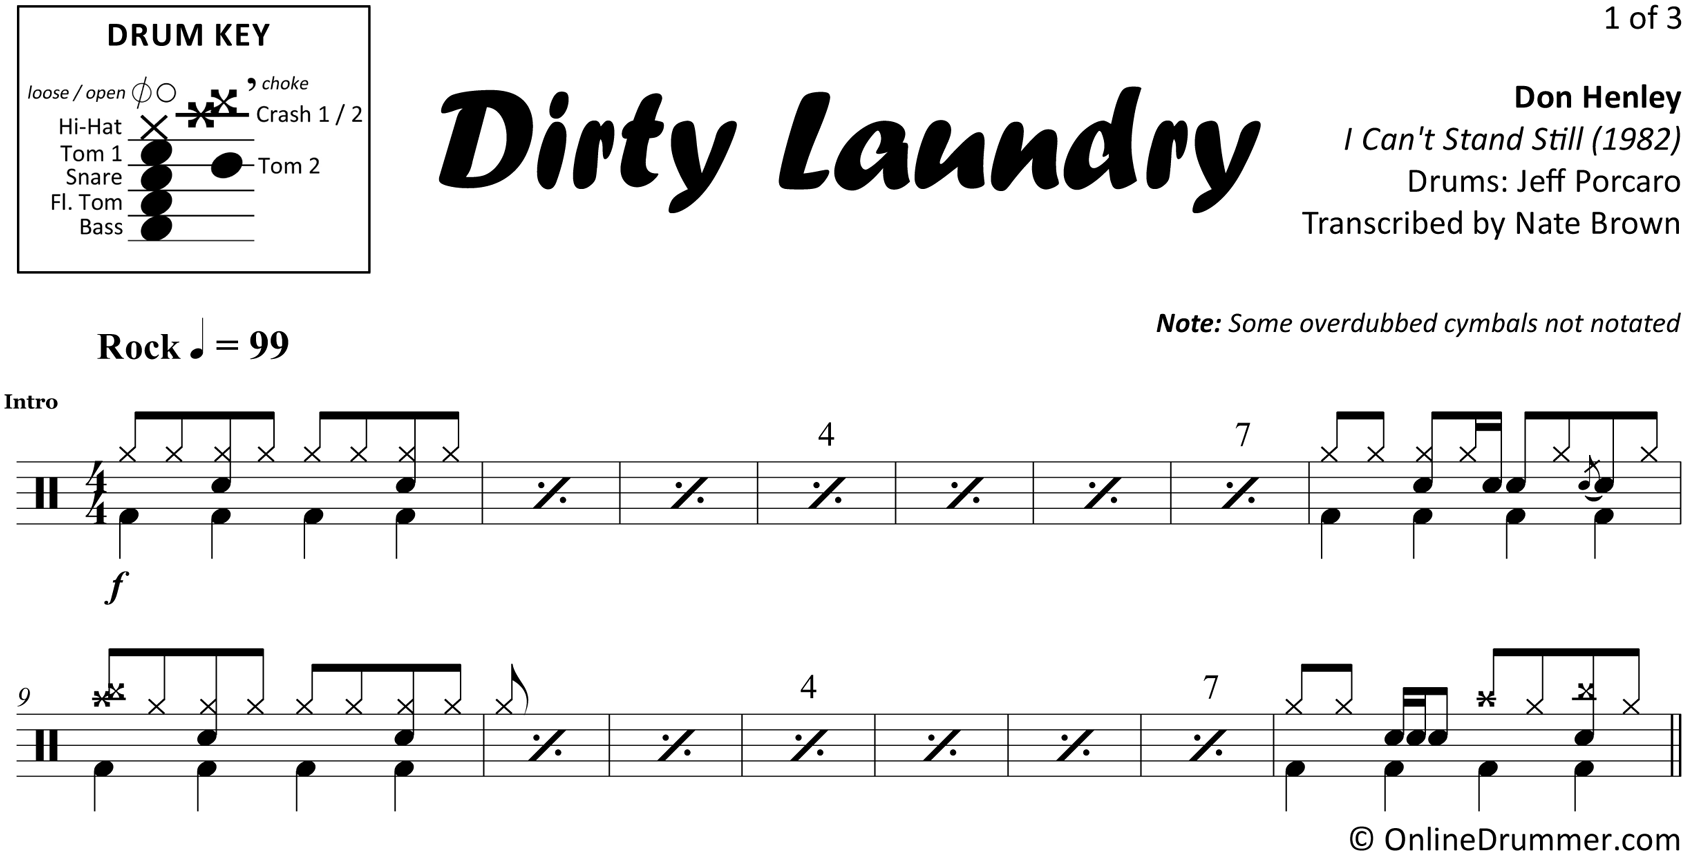 Dirty Laundry - Don Henley - Drum Sheet Music